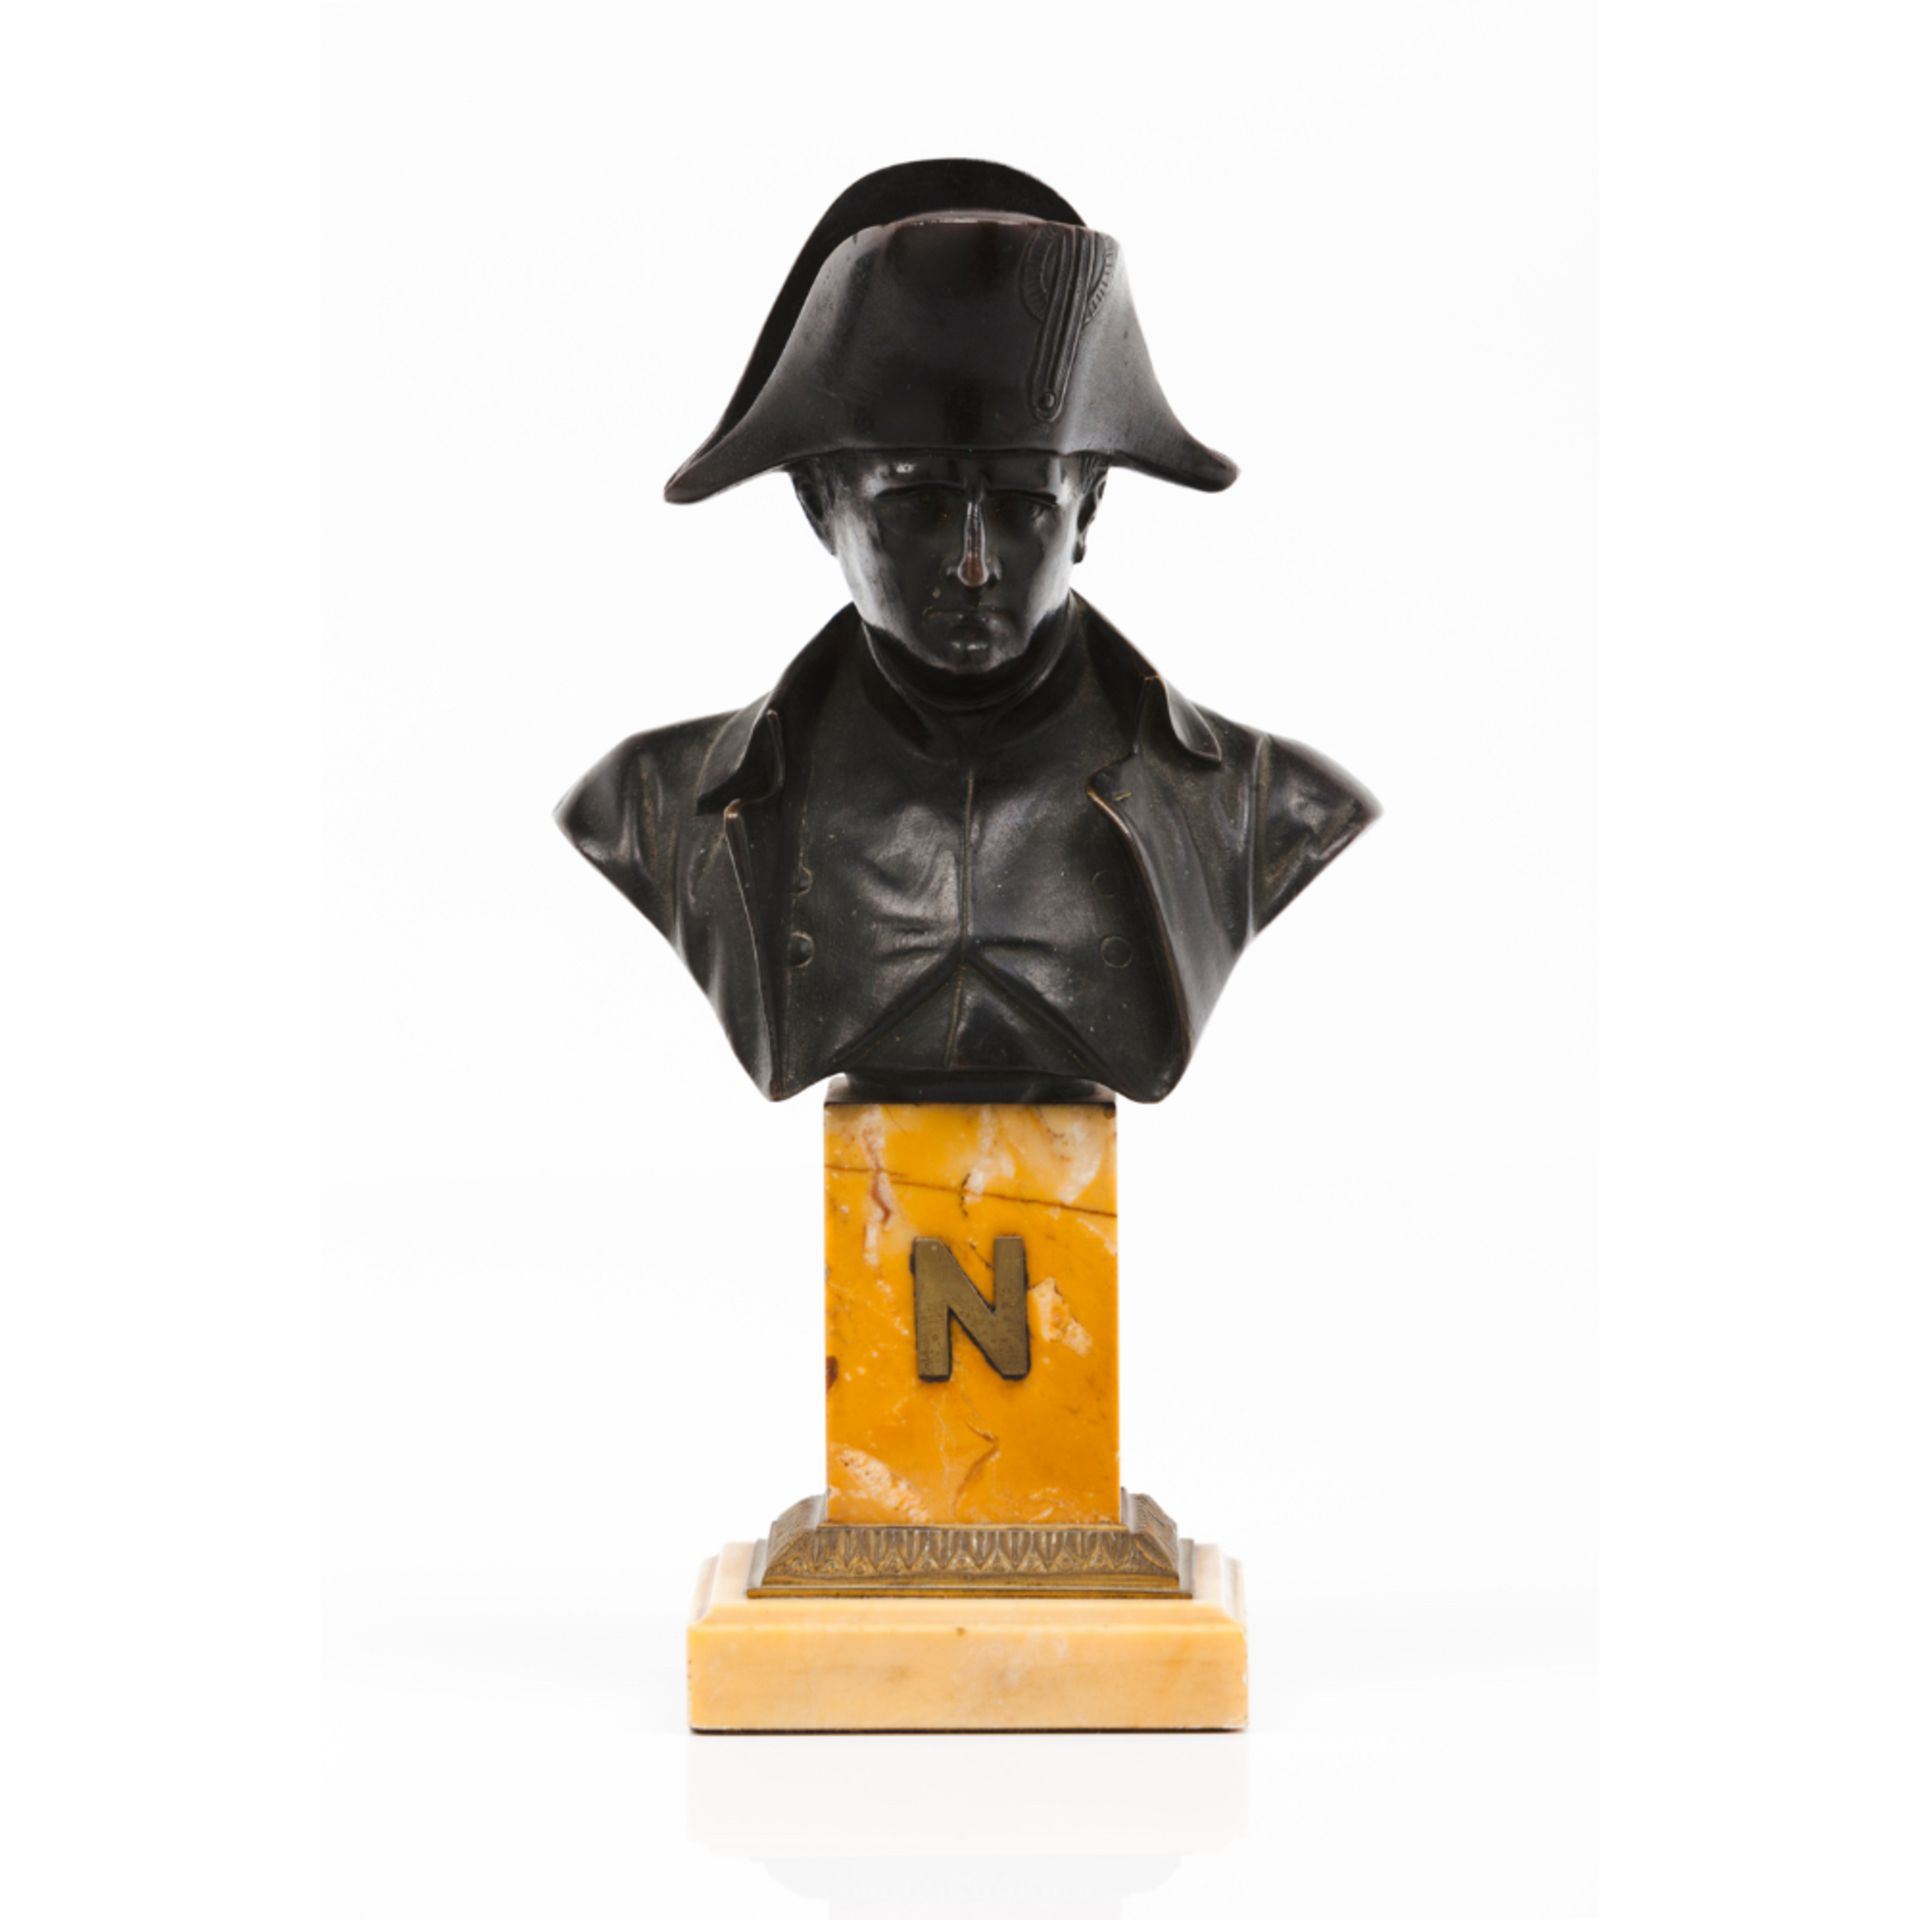 A bust of NapoleonPatinated bronze sculpture Marble stand with frieze and yellow metal "N" Signed "